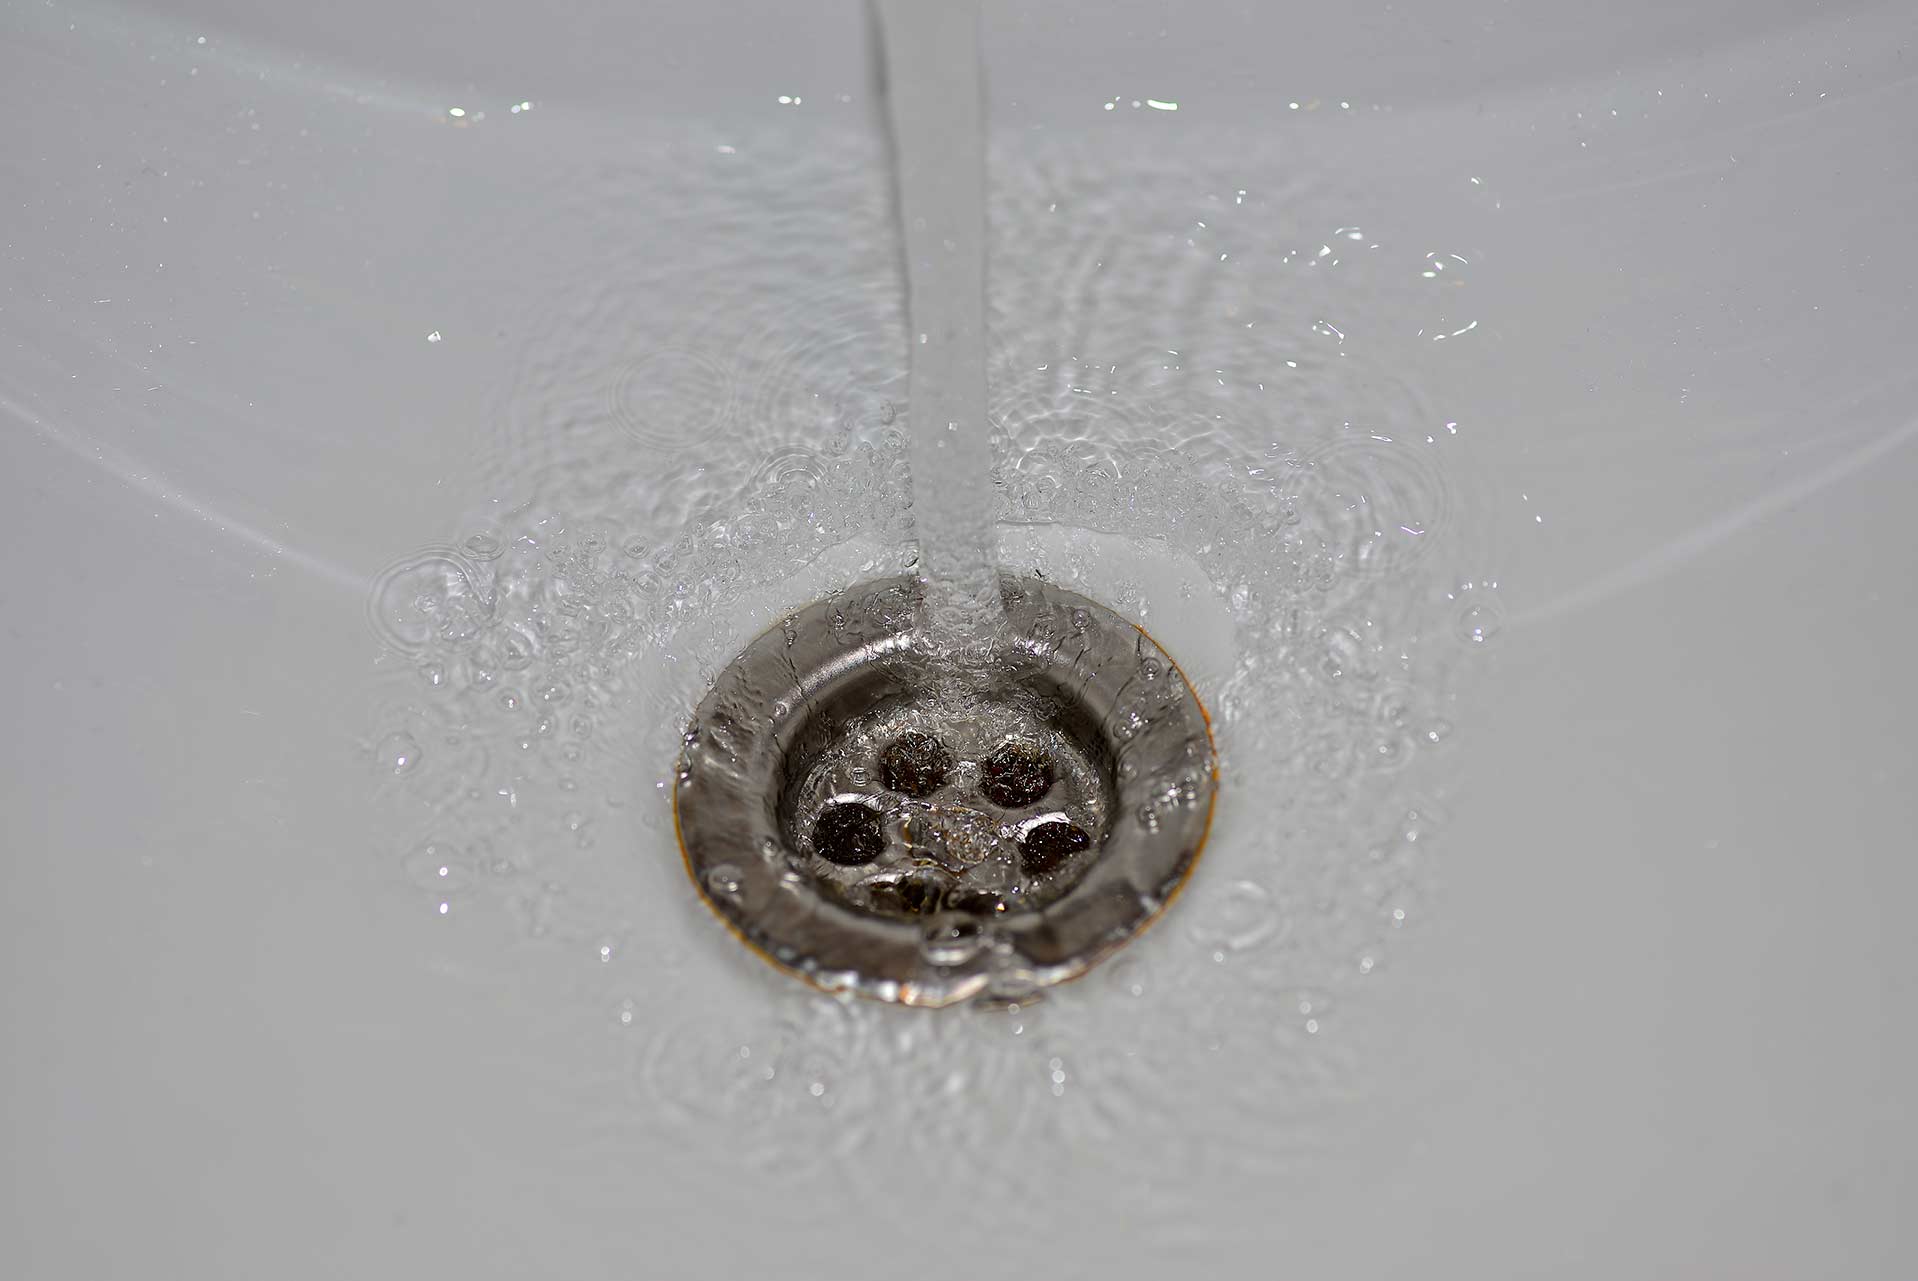 A2B Drains provides services to unblock blocked sinks and drains for properties in Tunbridge Wells.